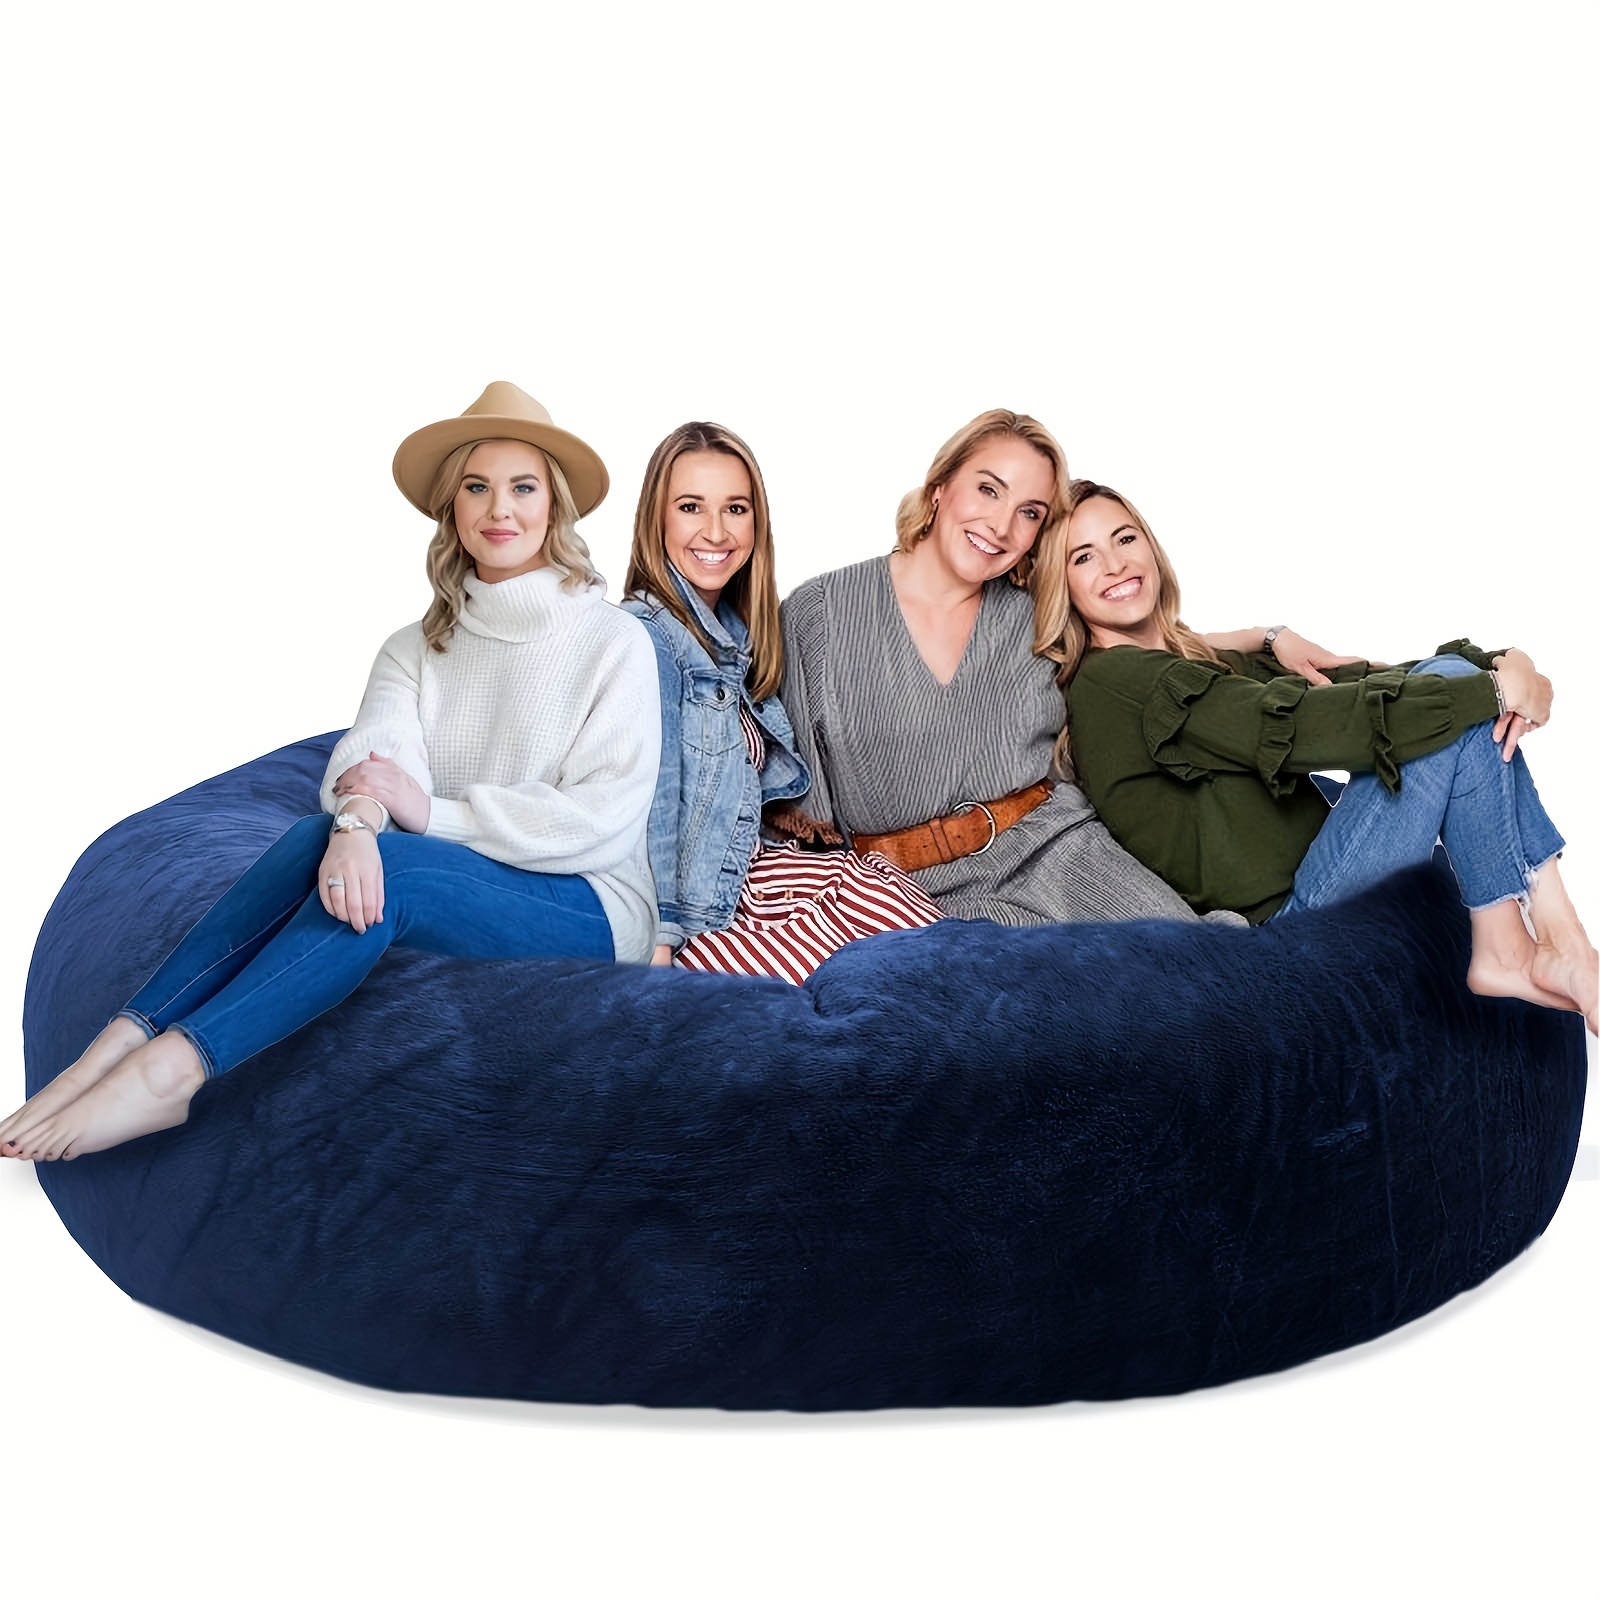 

Luxurious Bag Chair With Microsuede Cover Ultra Soft Washable Jumbo Sofa For Adults Sack Dorm, Family Room No Filling Material